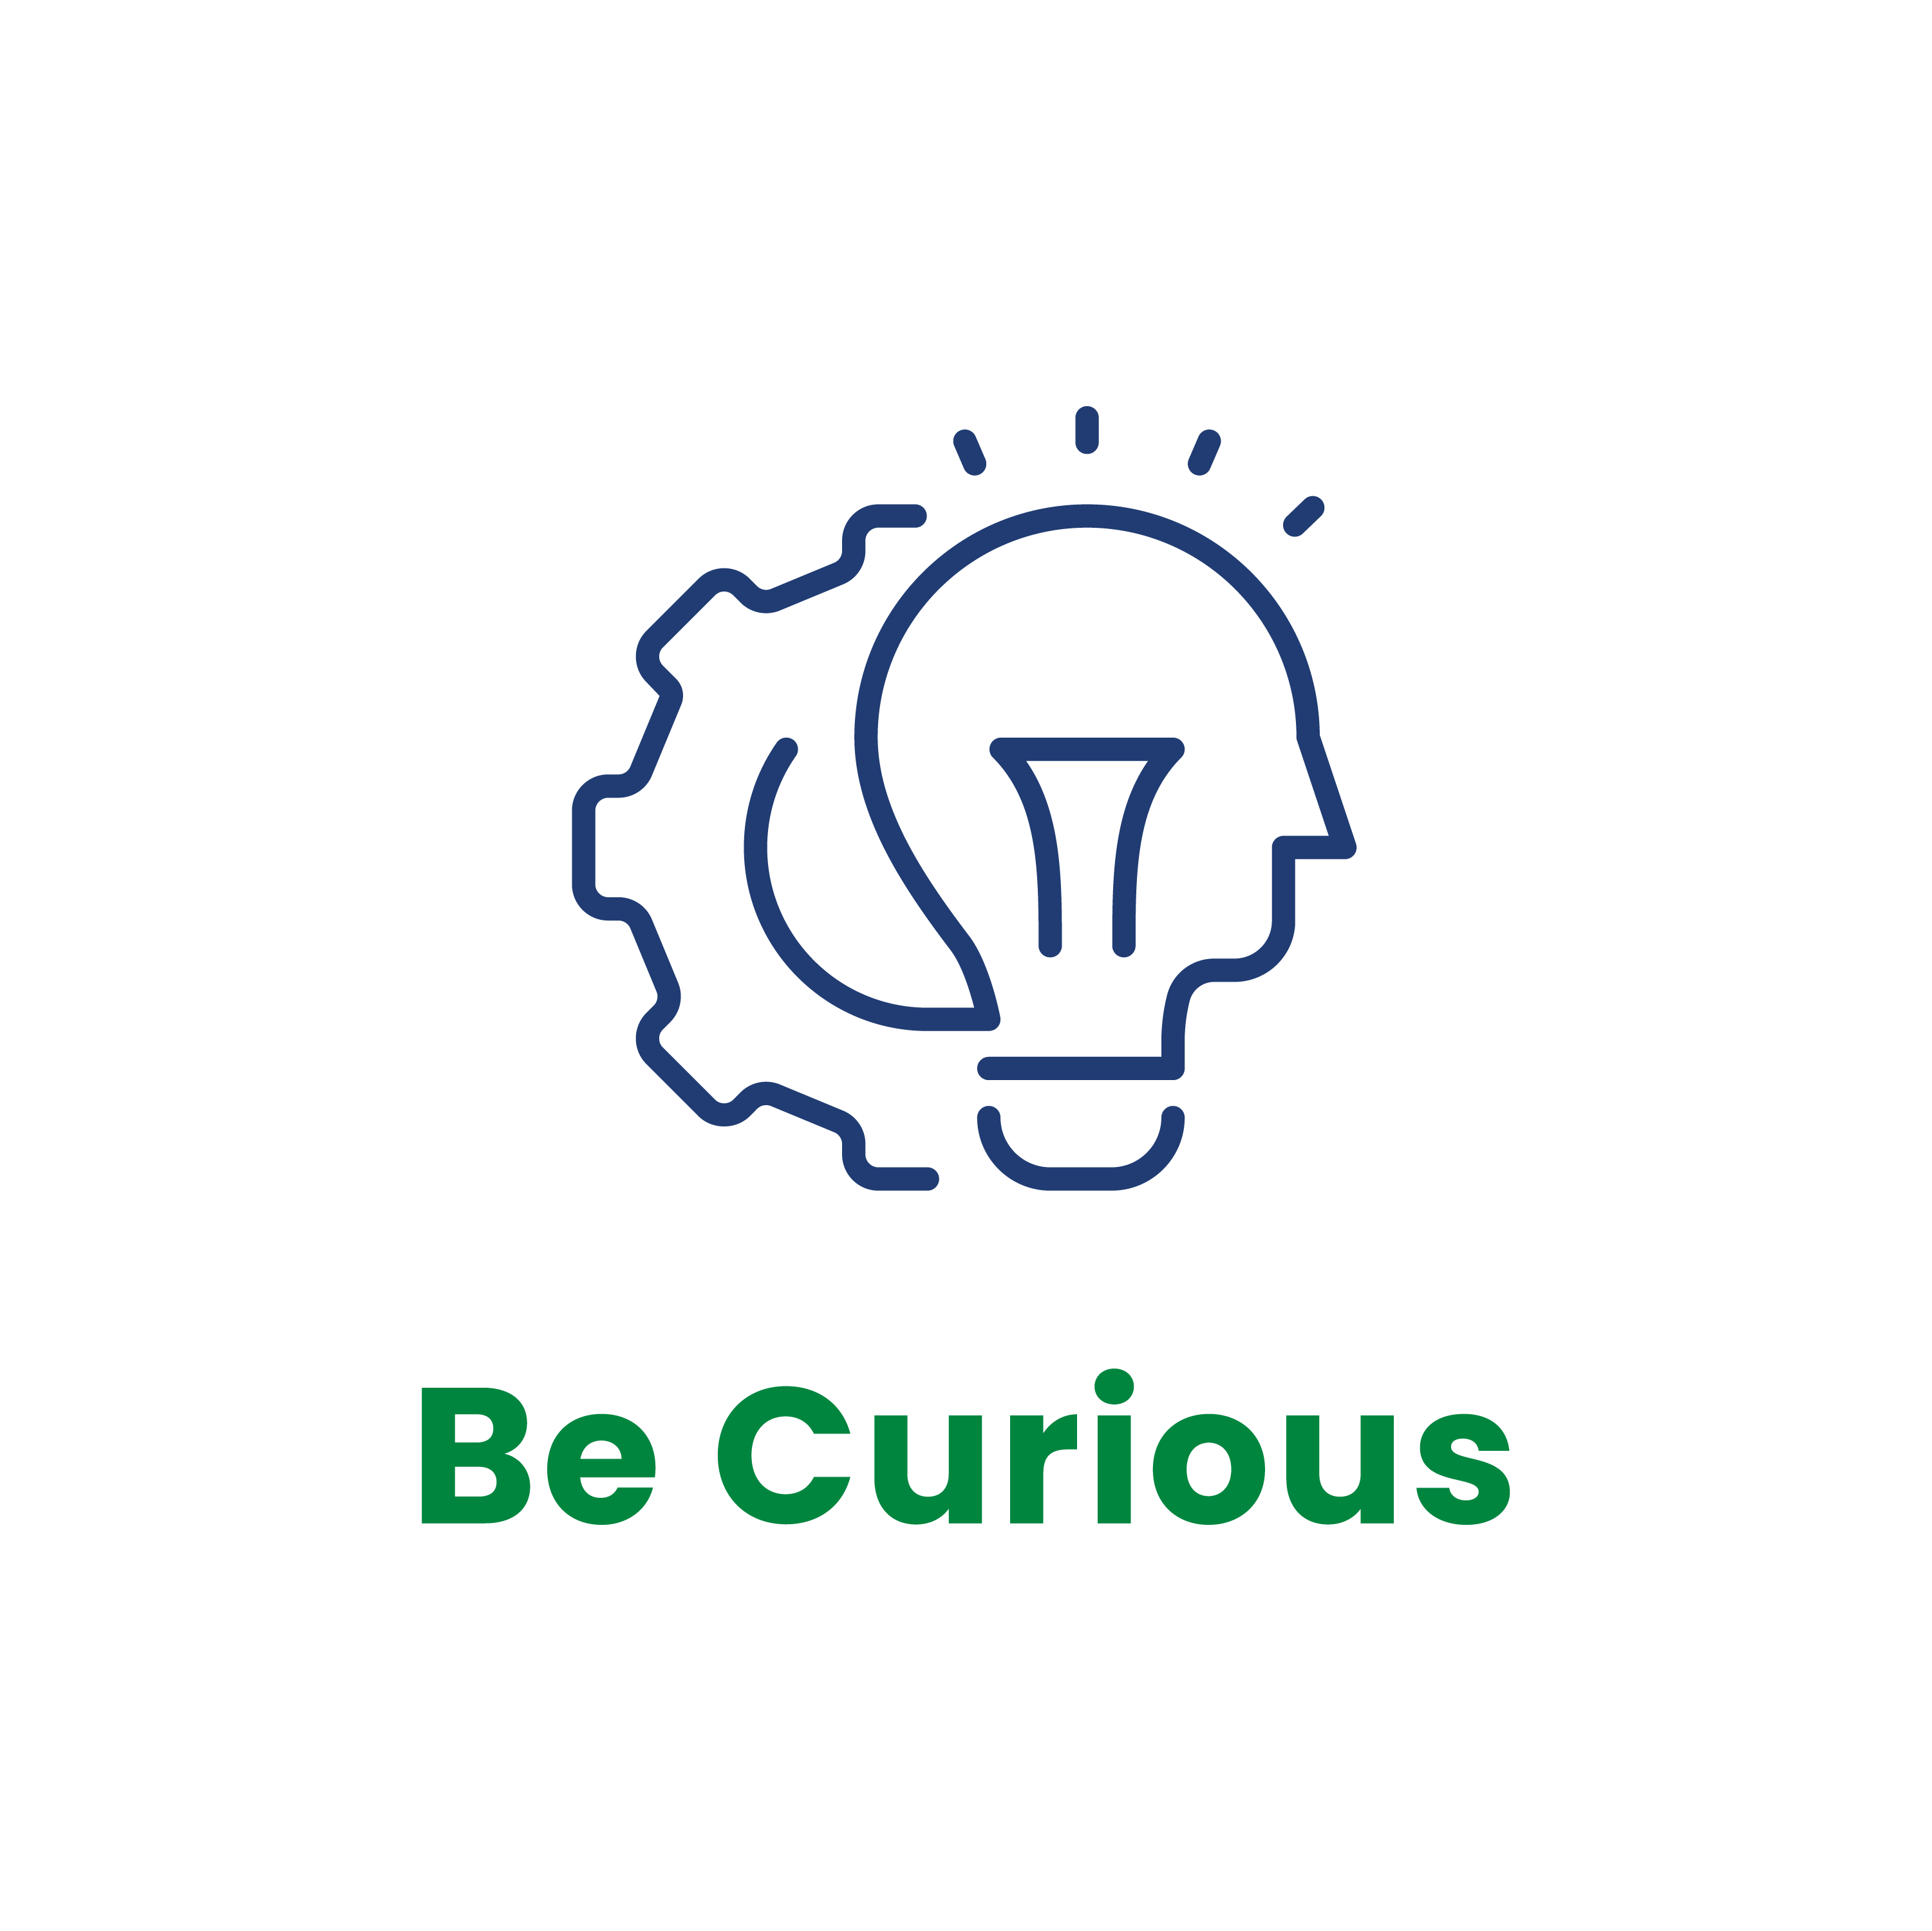 Values logo - Be Curious